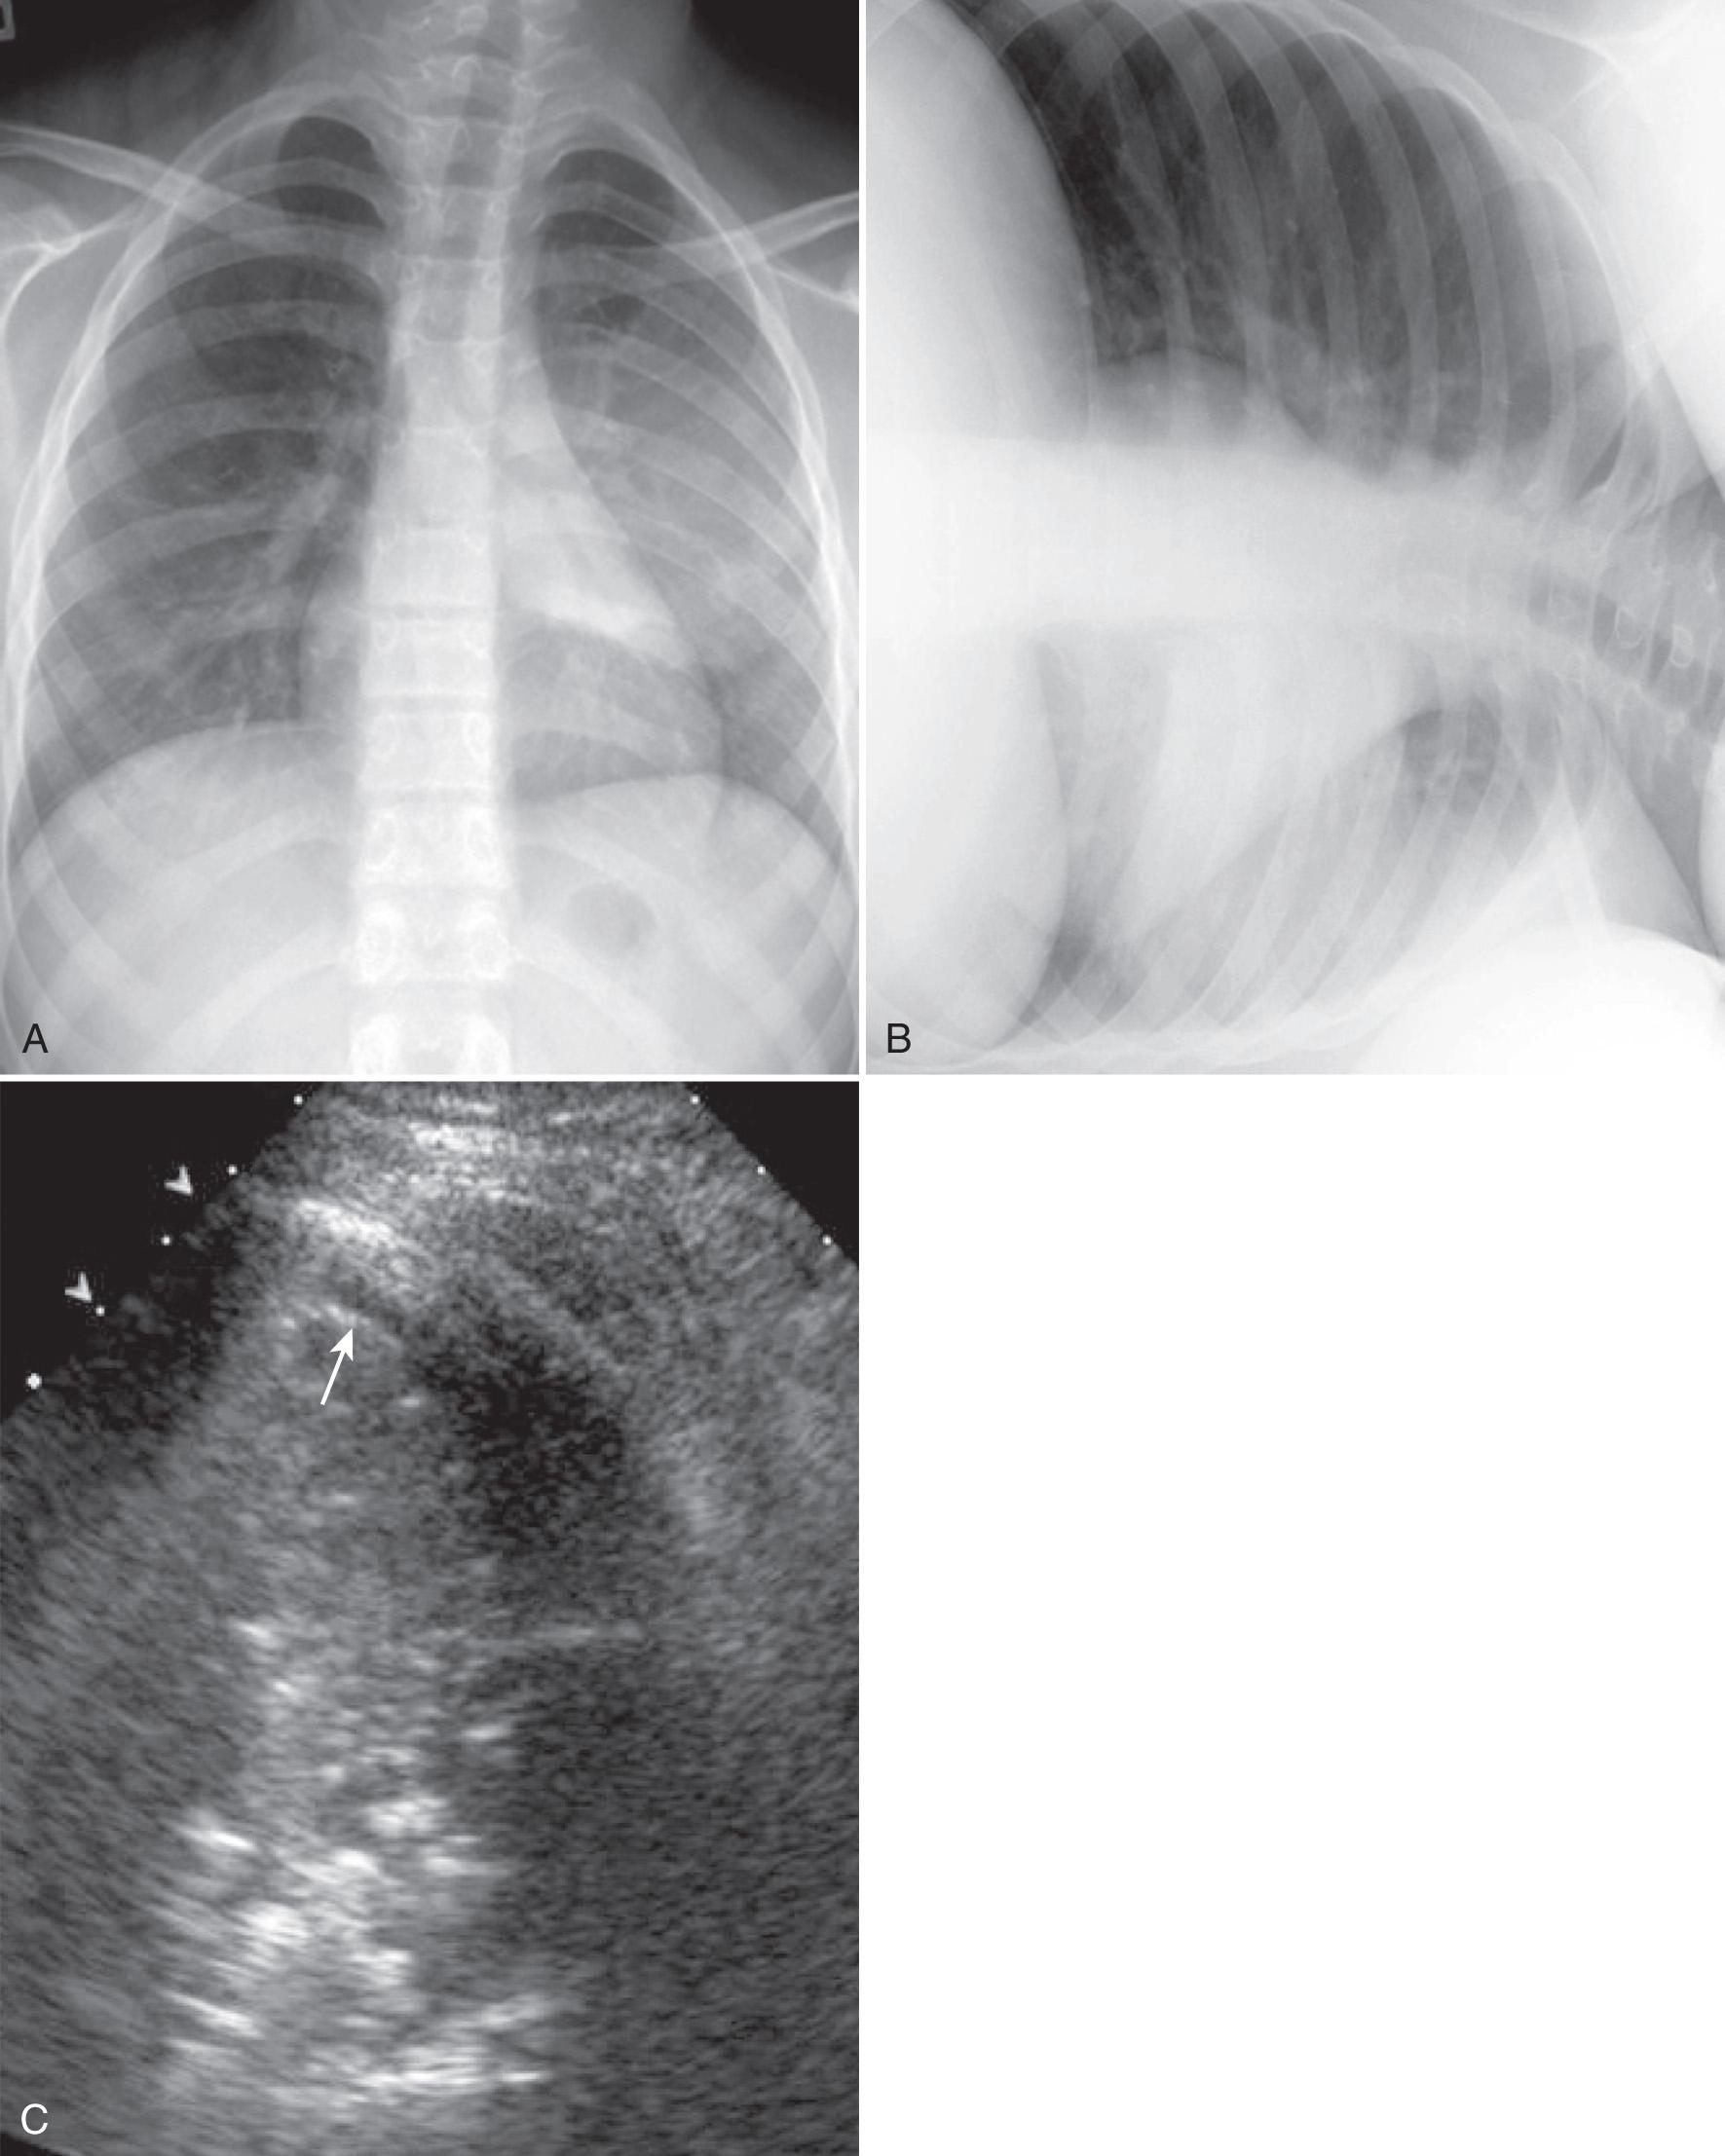 FIG. 50.6, Pneumonia With Small Amount of Pleural Fluid.